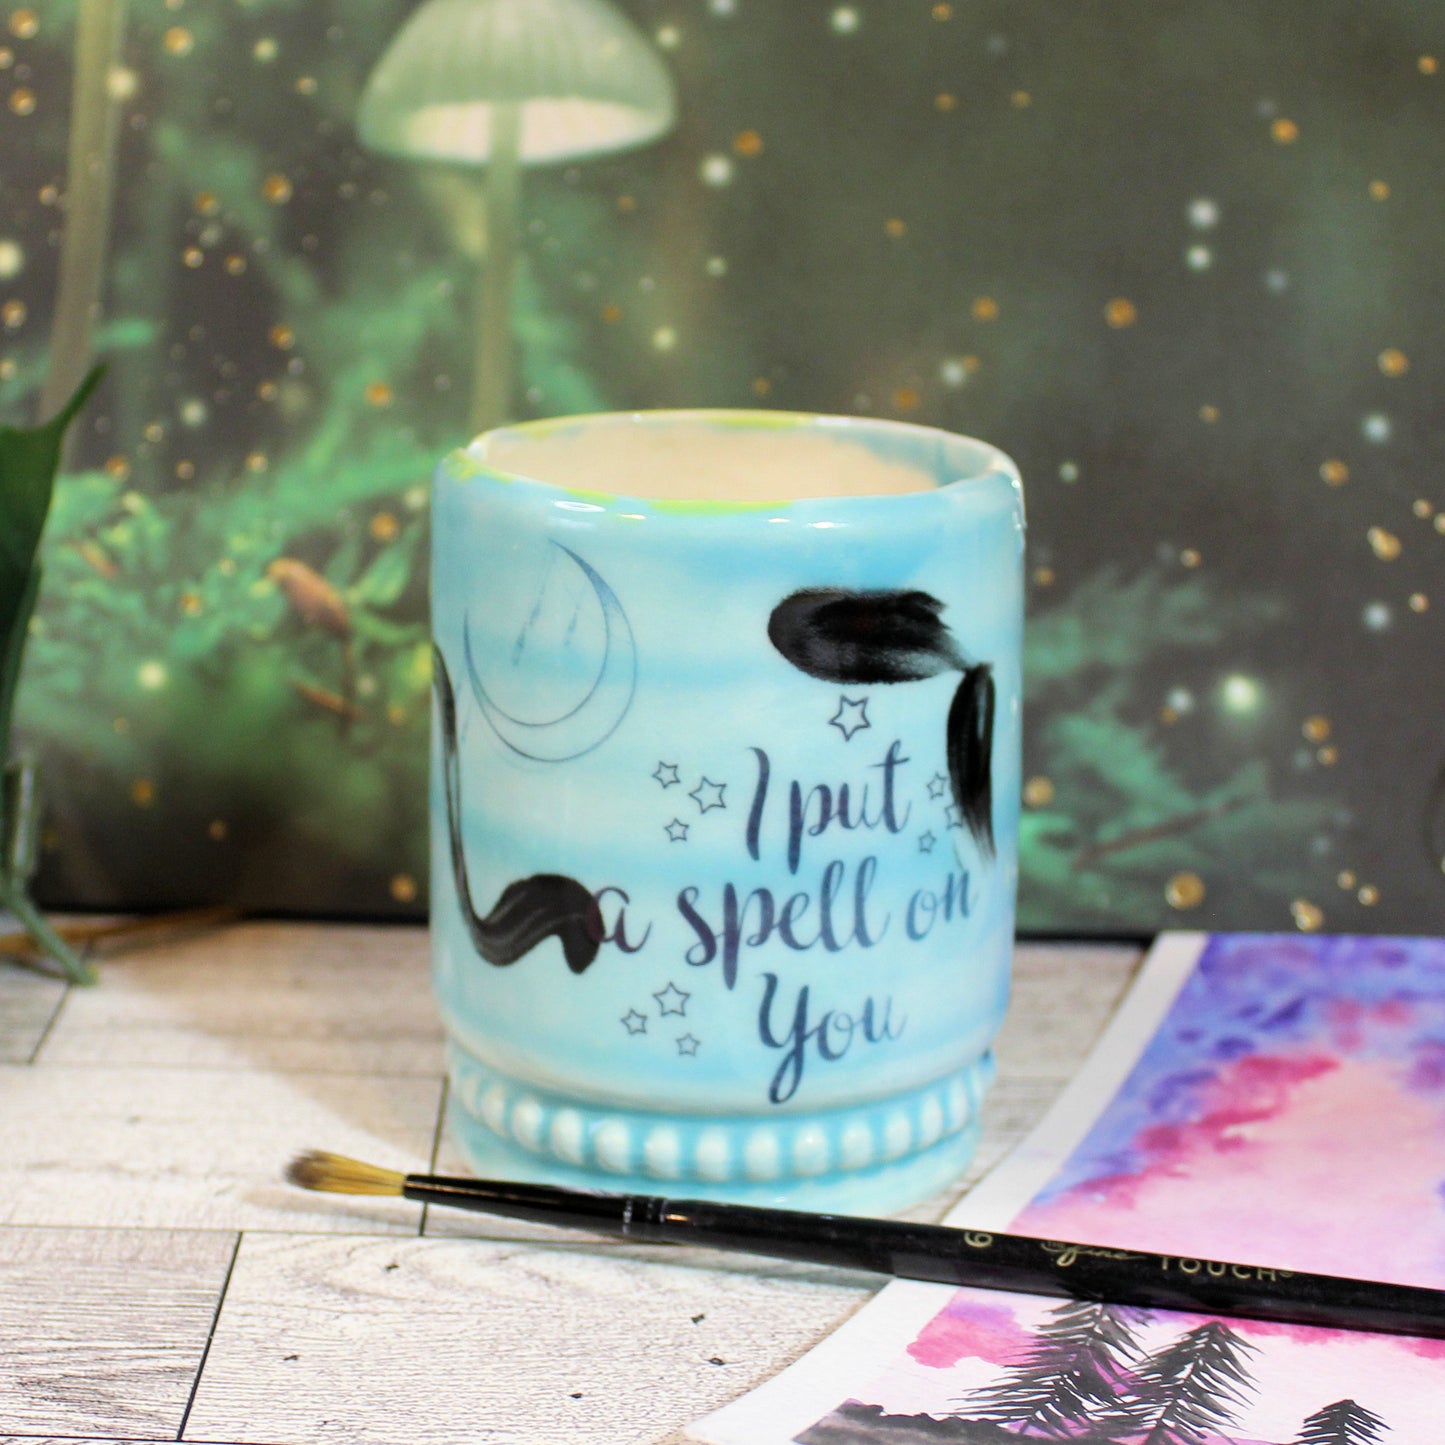 Paint Water Cup "I Put a Spell on You"